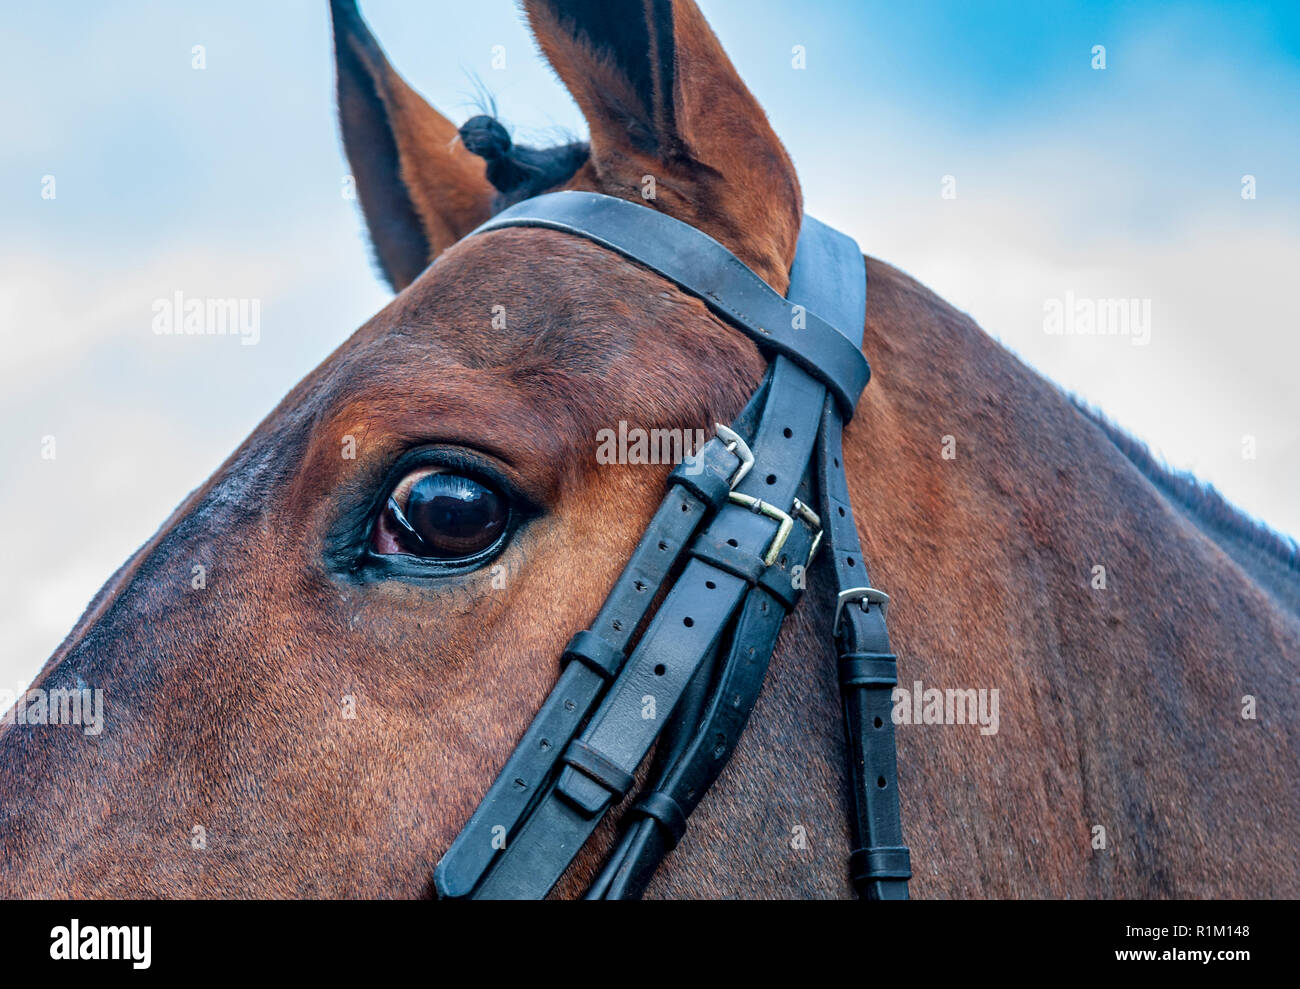 A close up of a horse's head and eye photographed against a sky Stock Photo